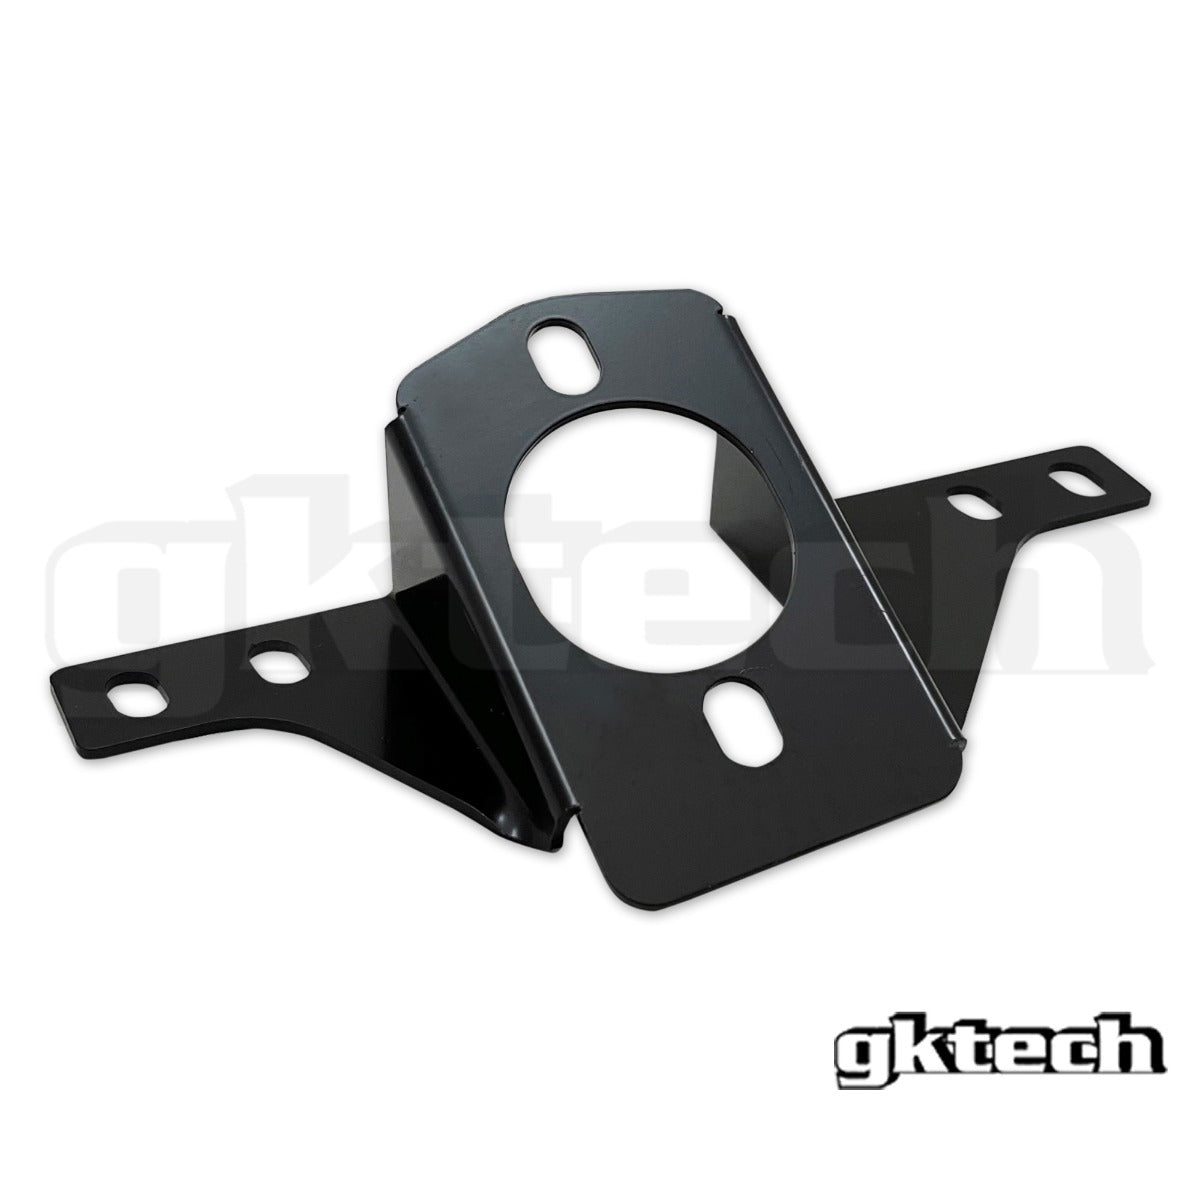 additional support brace to suit 350z hydraulic handbrake assembly